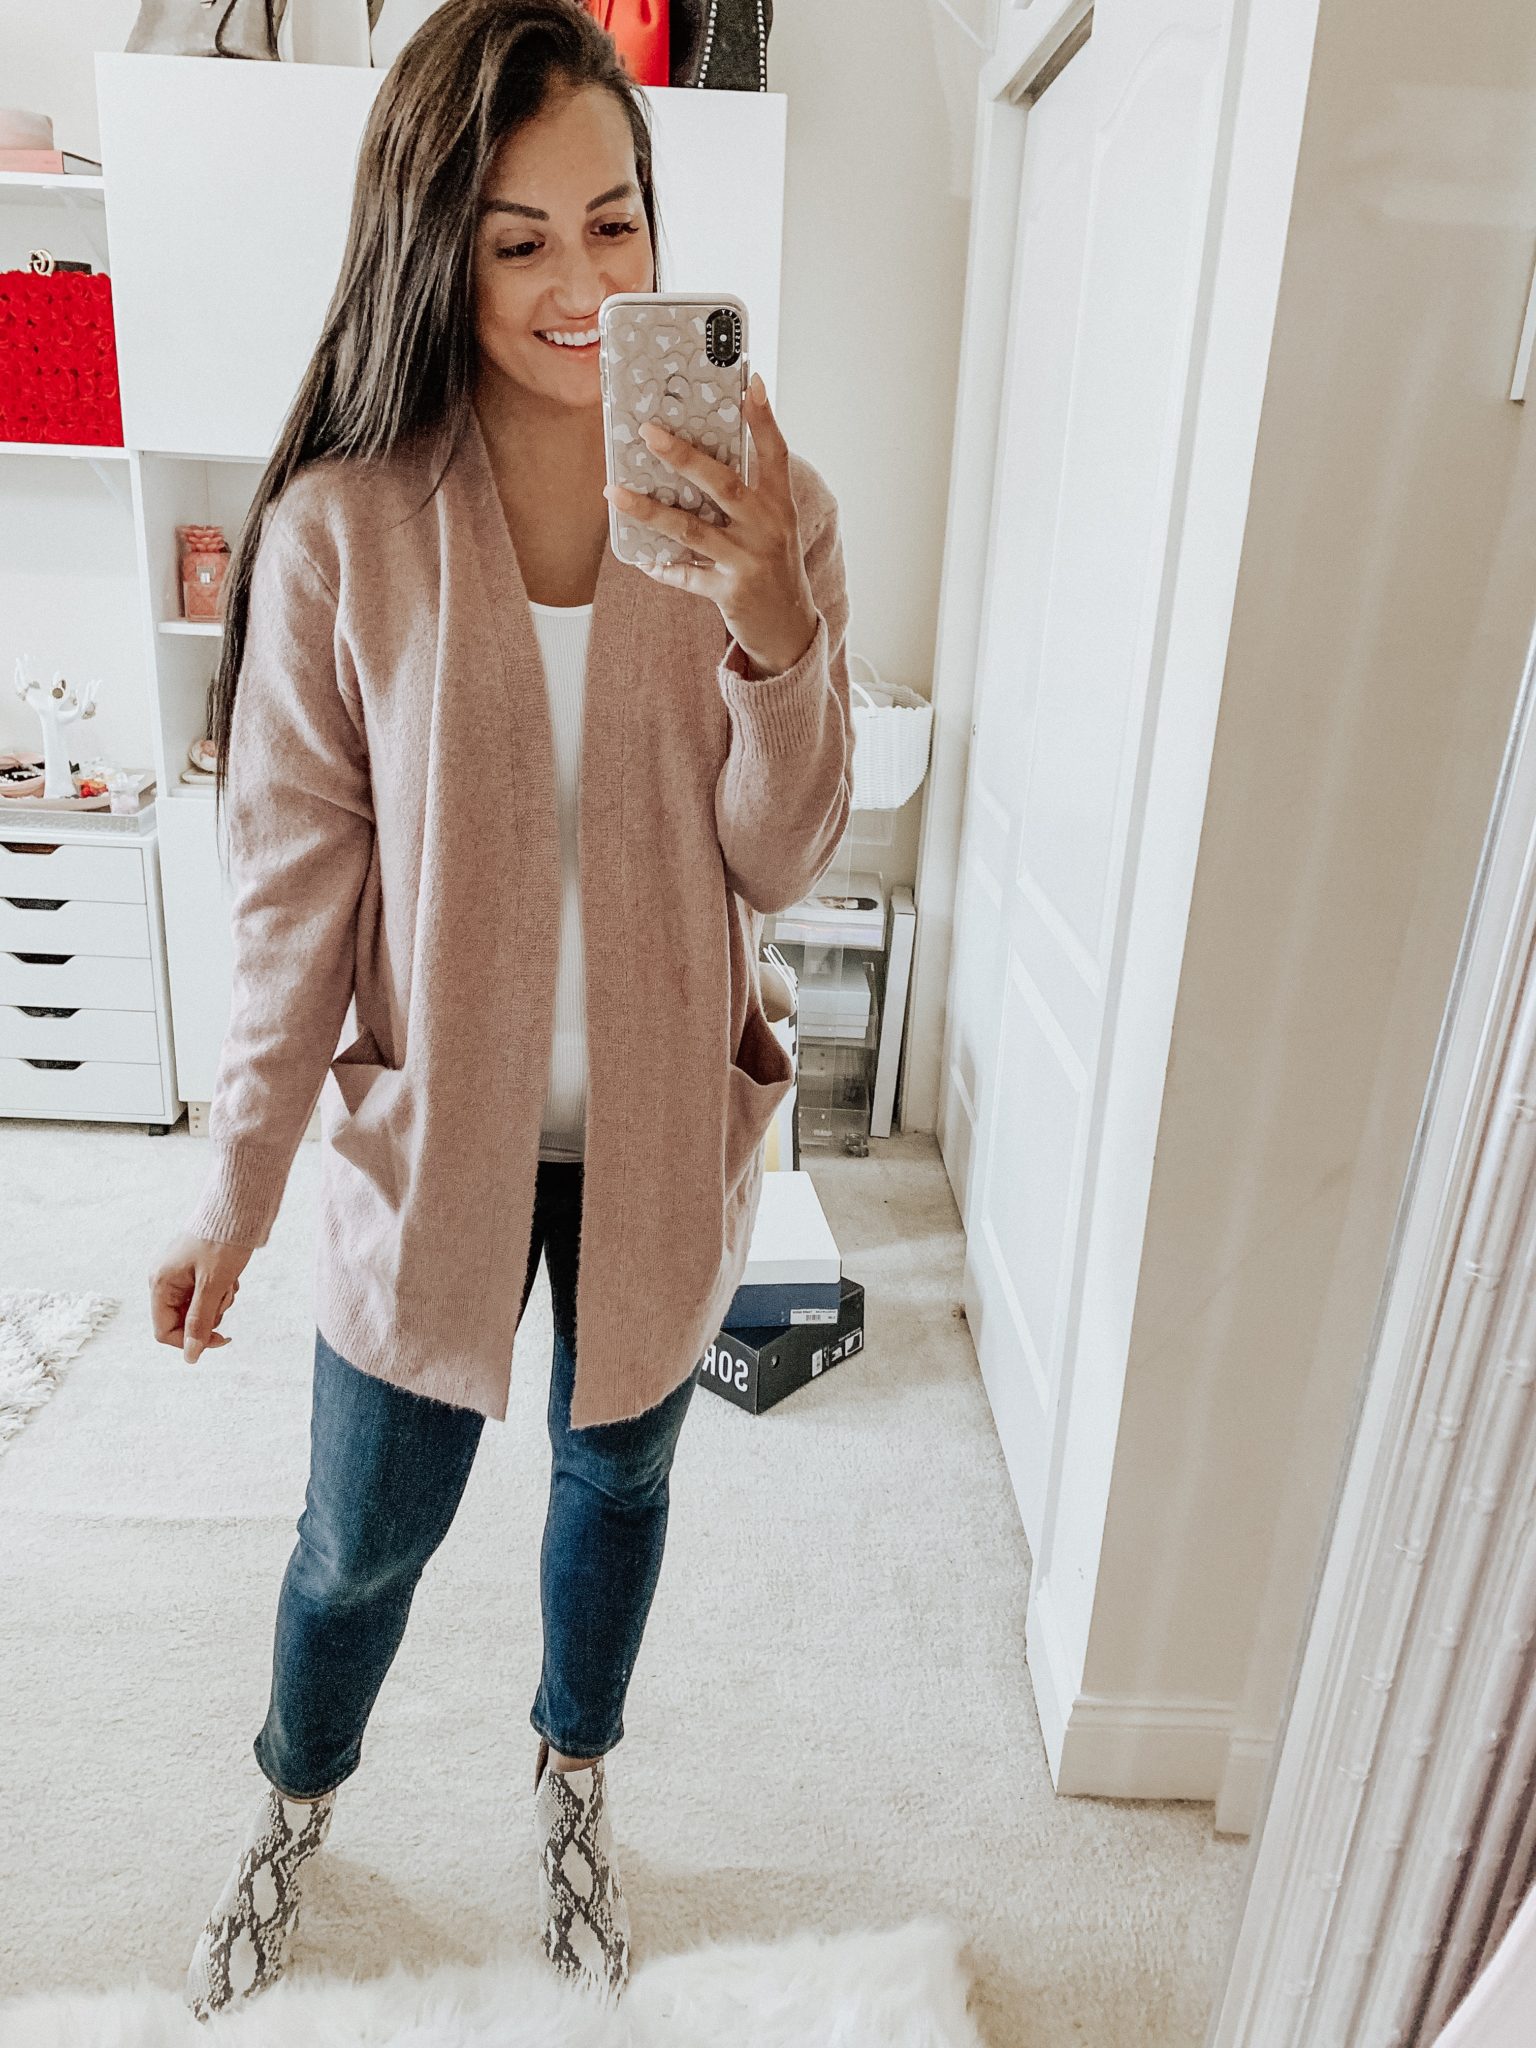 Nordstrom Anniversary Sale 2019 – What I bought!